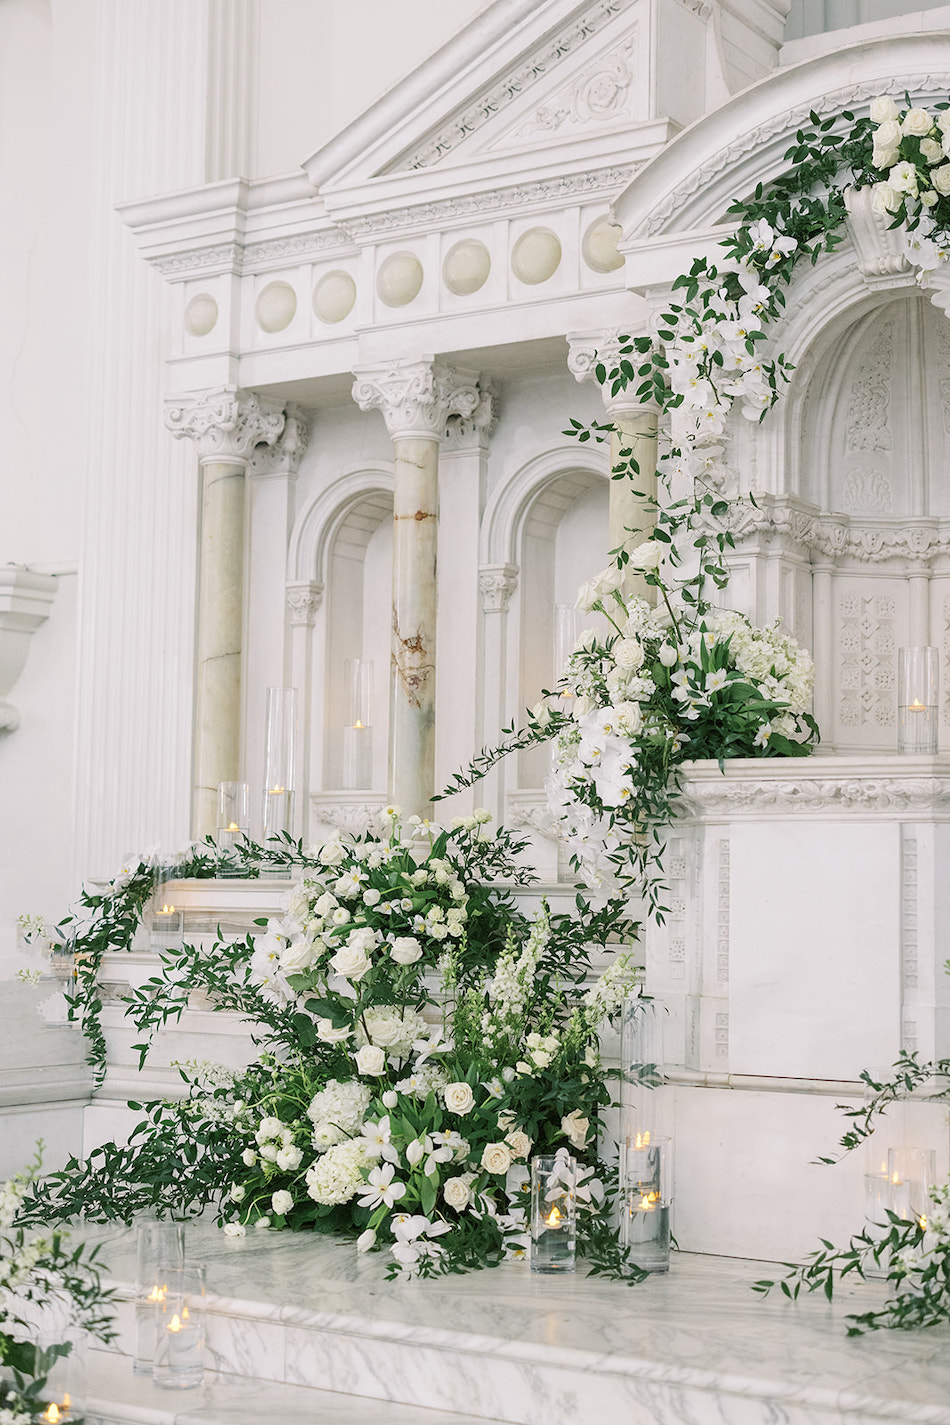 white ceremony florals, white florals, ceremony, floral design, florist, wedding florist, wedding flowers, orange county weddings, orange county wedding florist, orange county florist, orange county floral design, flowers by cina